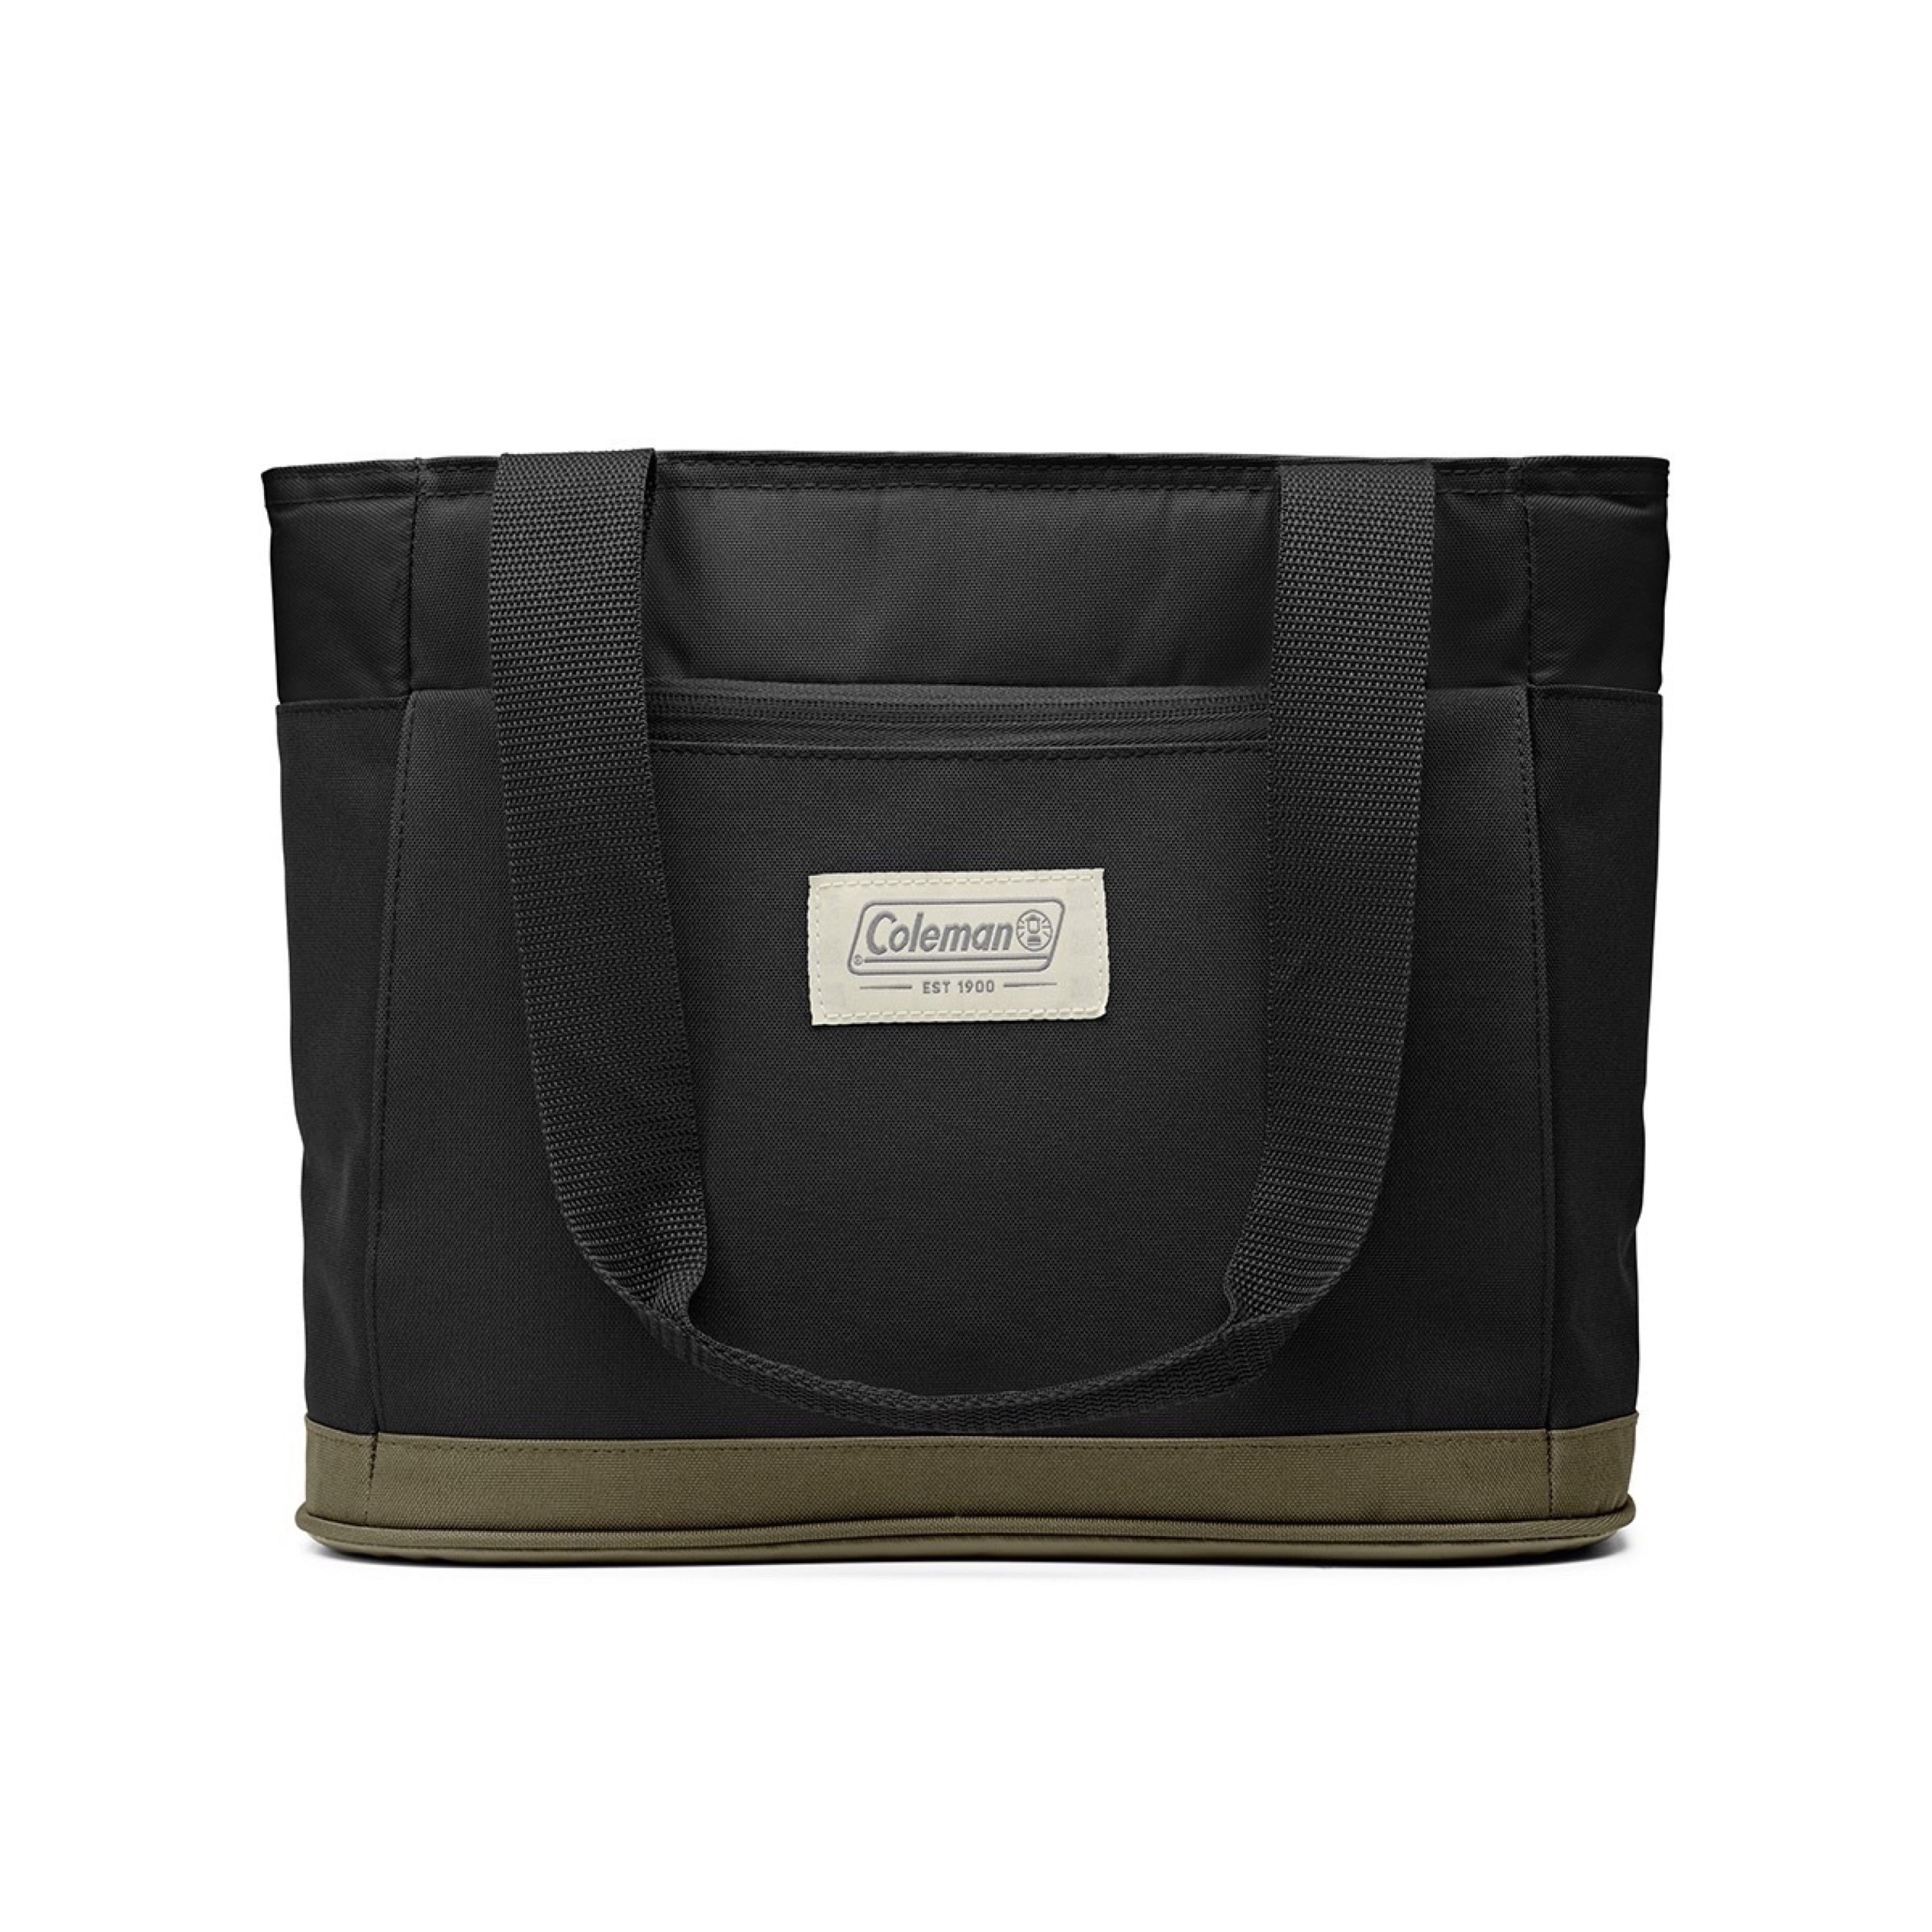 Coleman Outlander 14Qt 20-Cans Soft Thermo Cooler Tote, Black and Olive, Stay Cold up to 24 Hours - Walmart.com